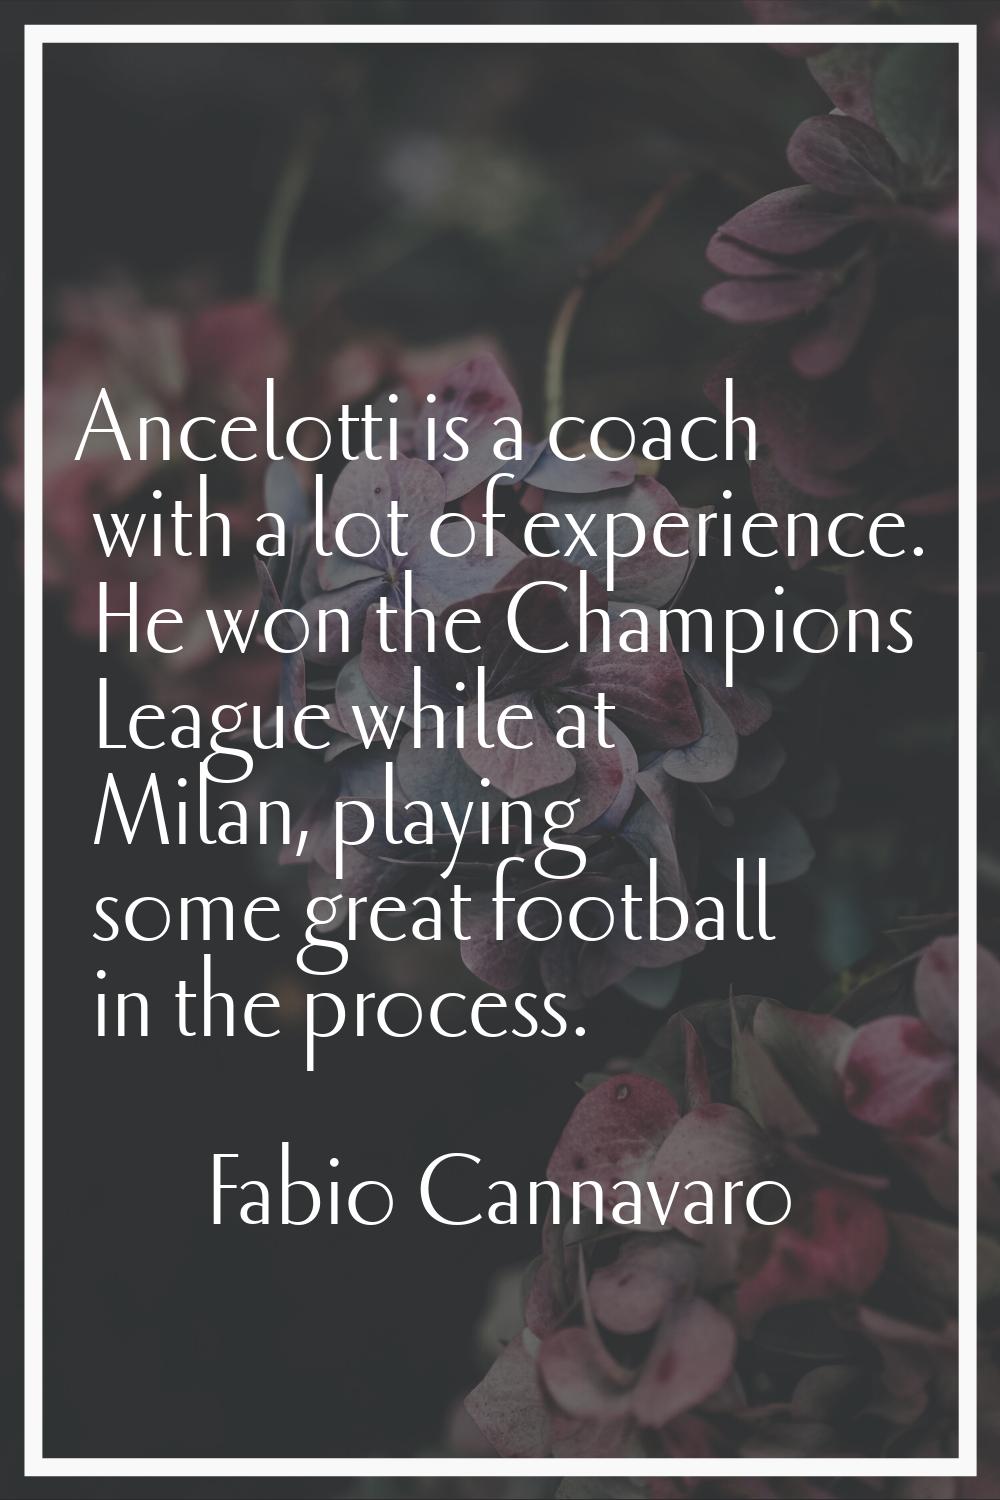 Ancelotti is a coach with a lot of experience. He won the Champions League while at Milan, playing 